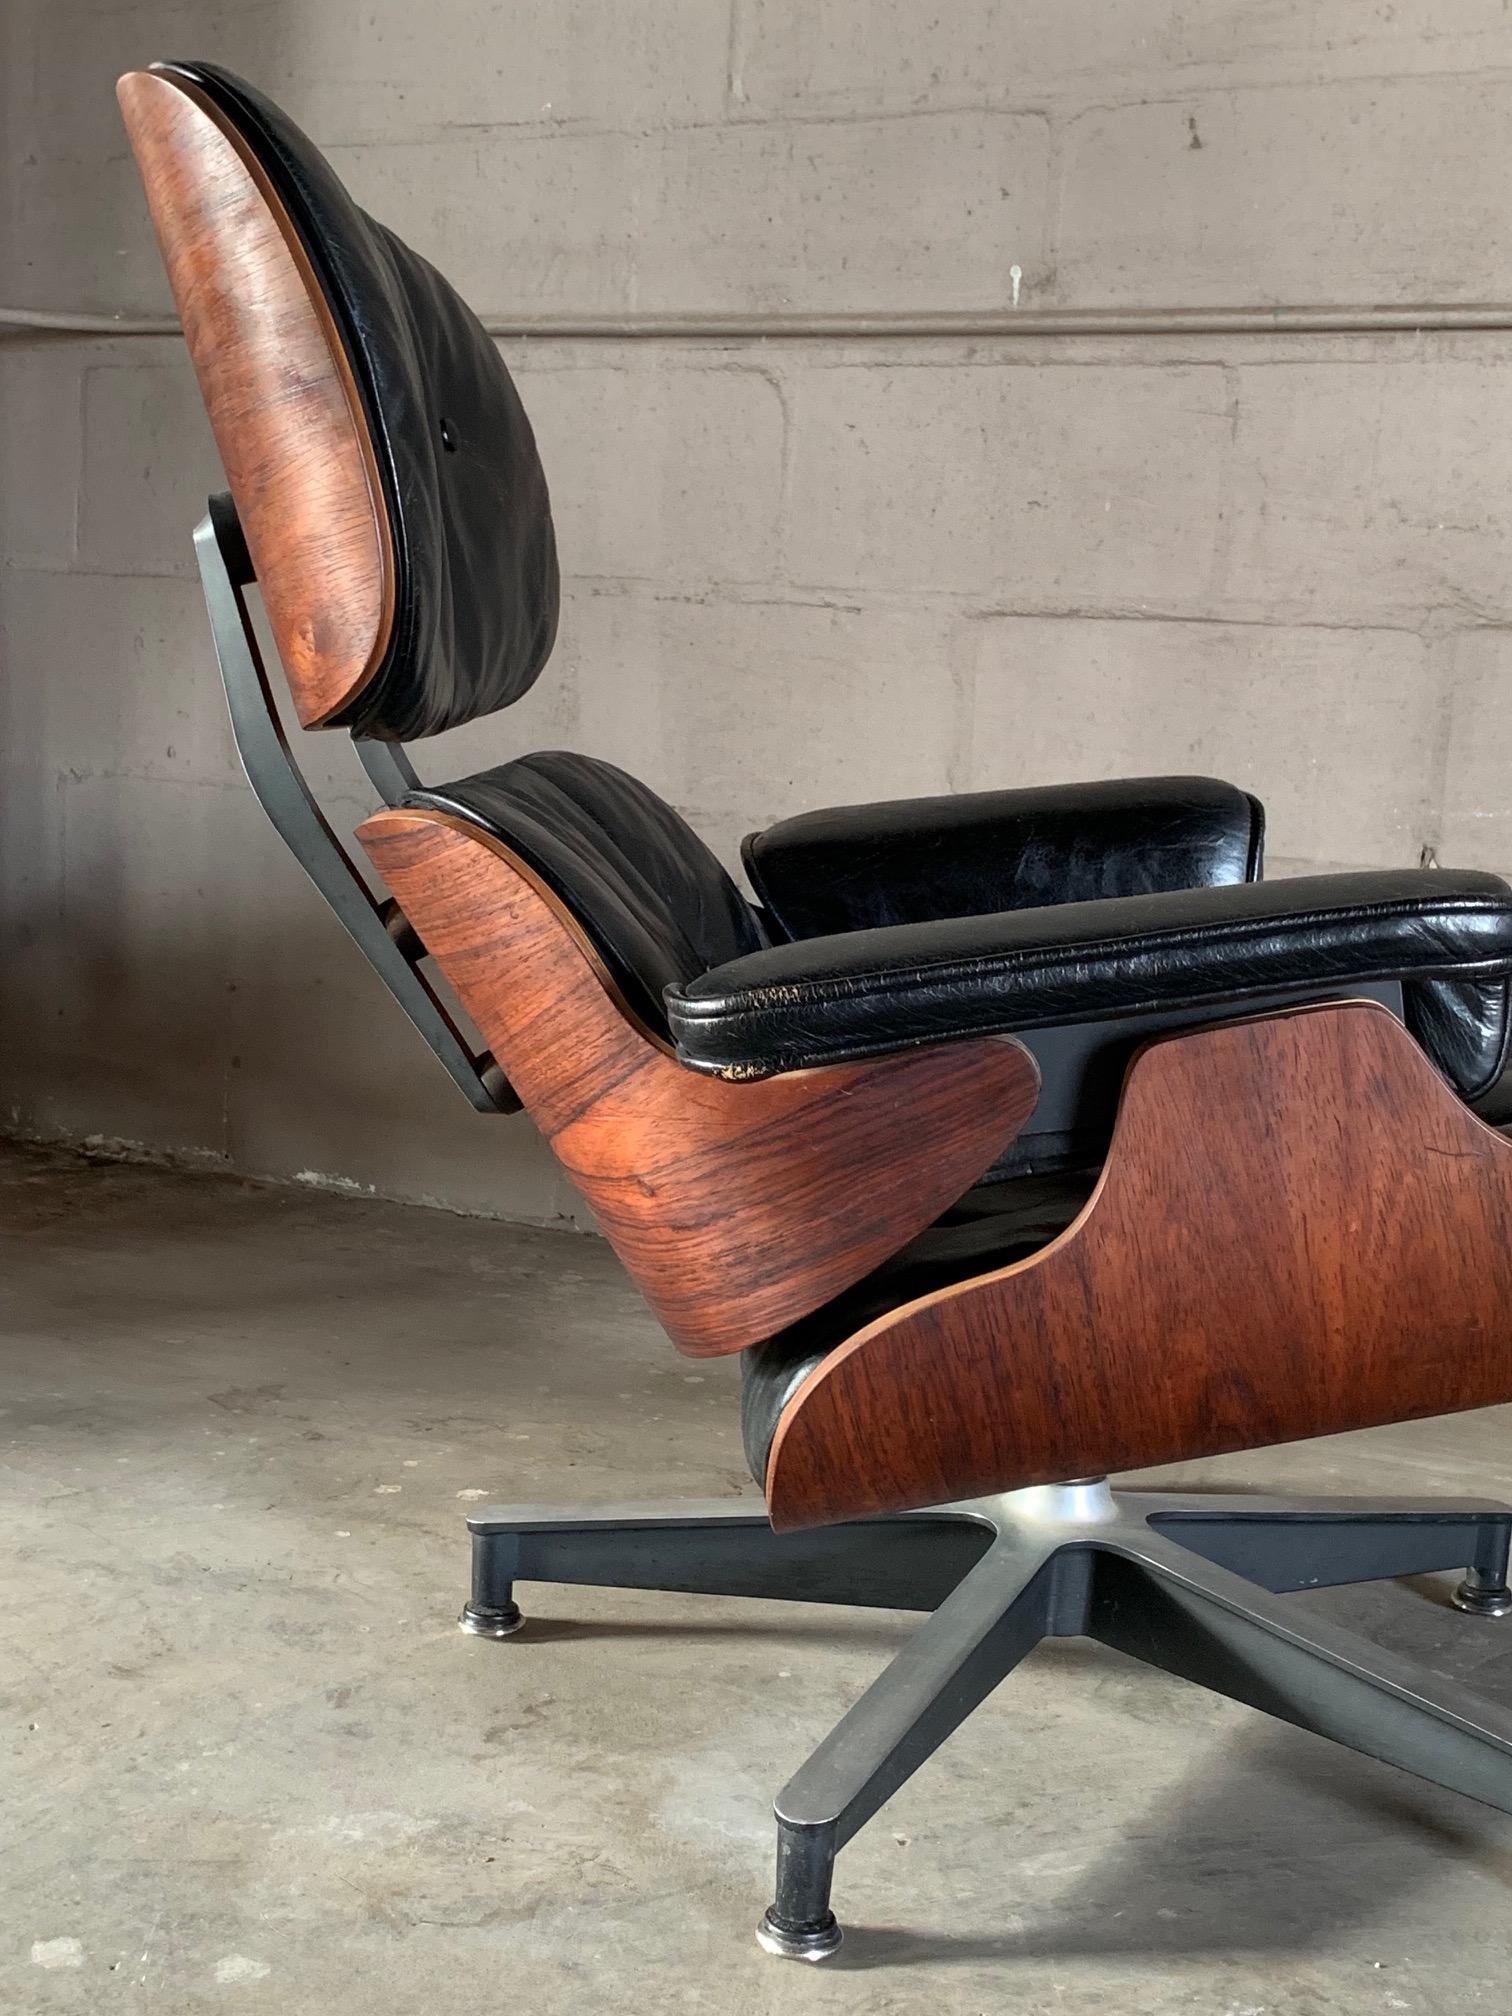 Mid-20th Century Charles Eames Herman Miller Lounge Chair and Ottoman 1956